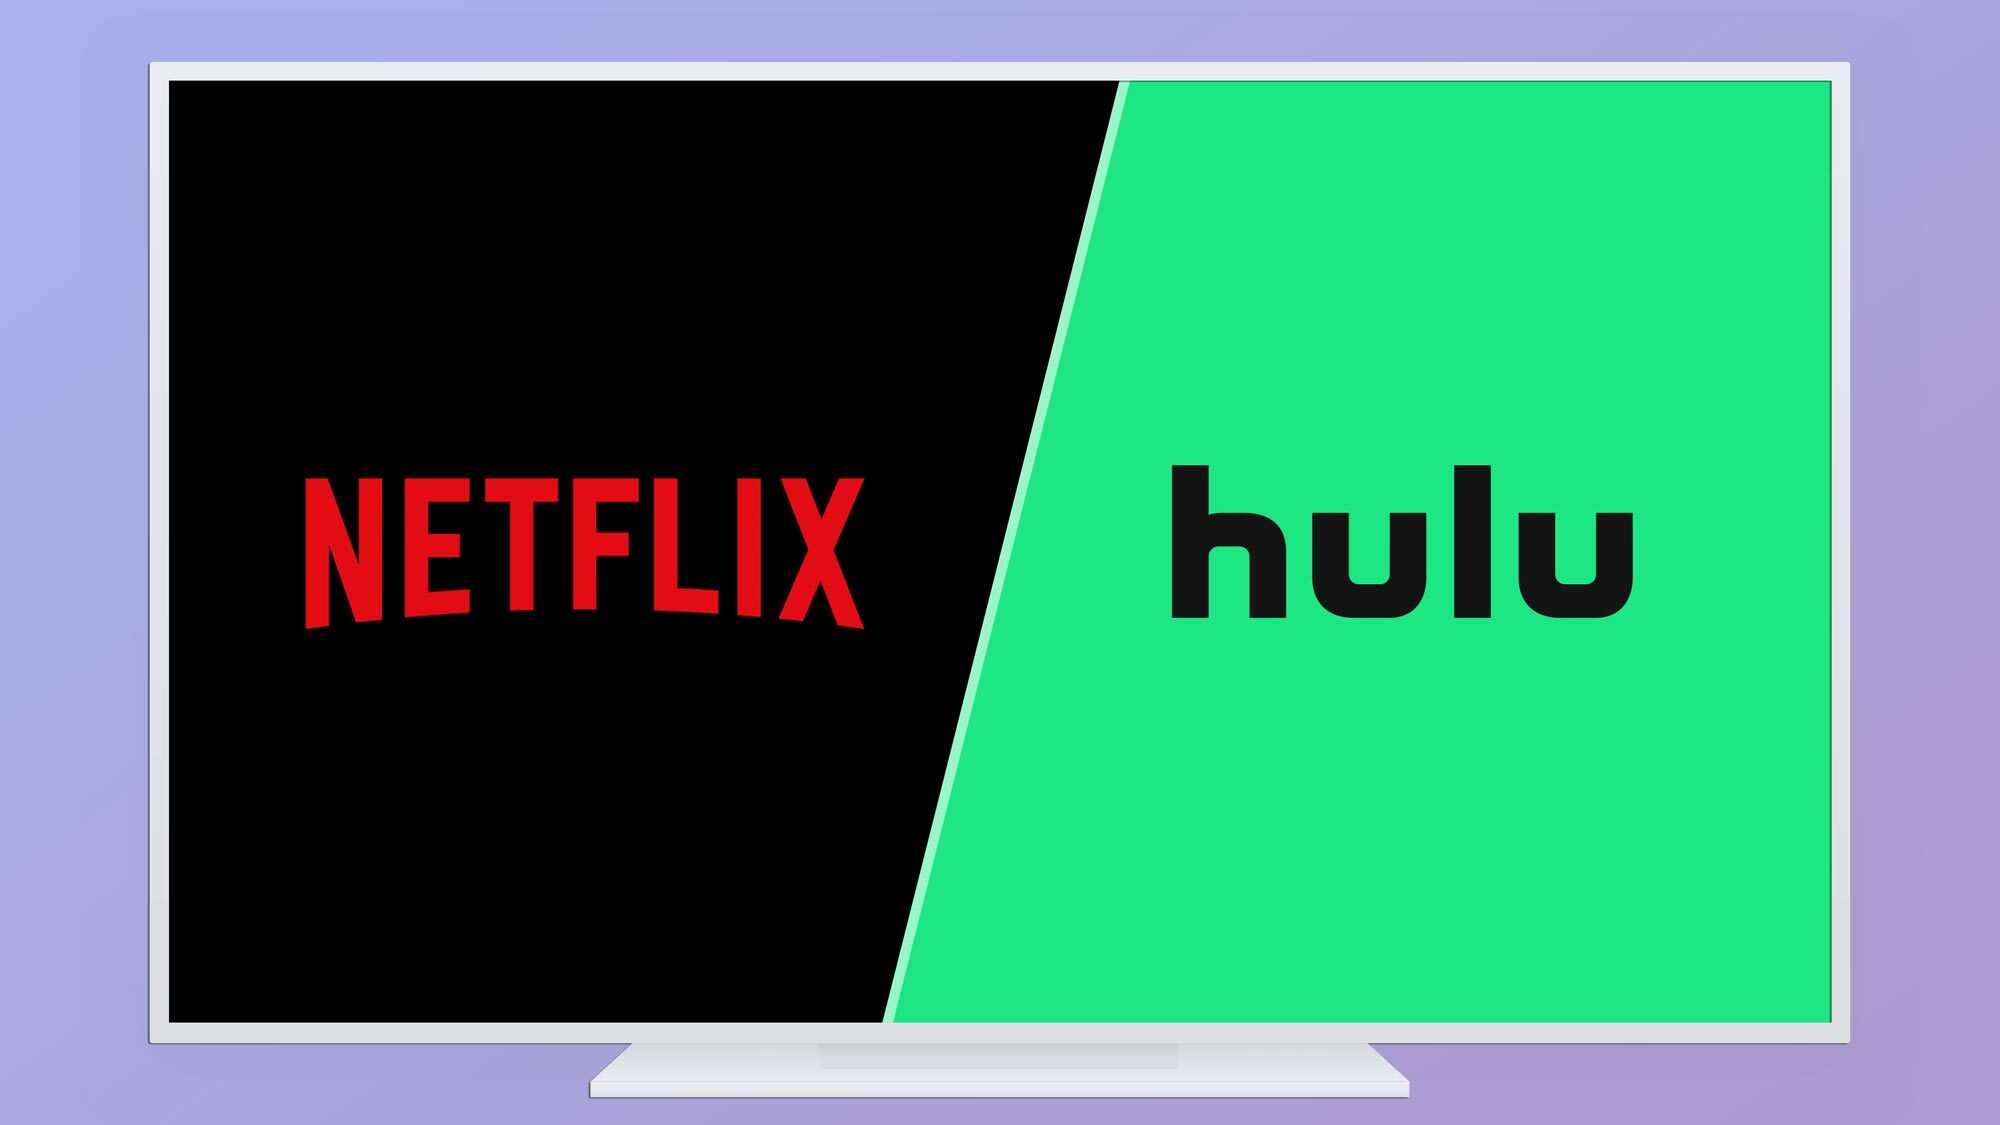 Netflix Vs Hulu Which Streaming Service Is Better Tom S Guide